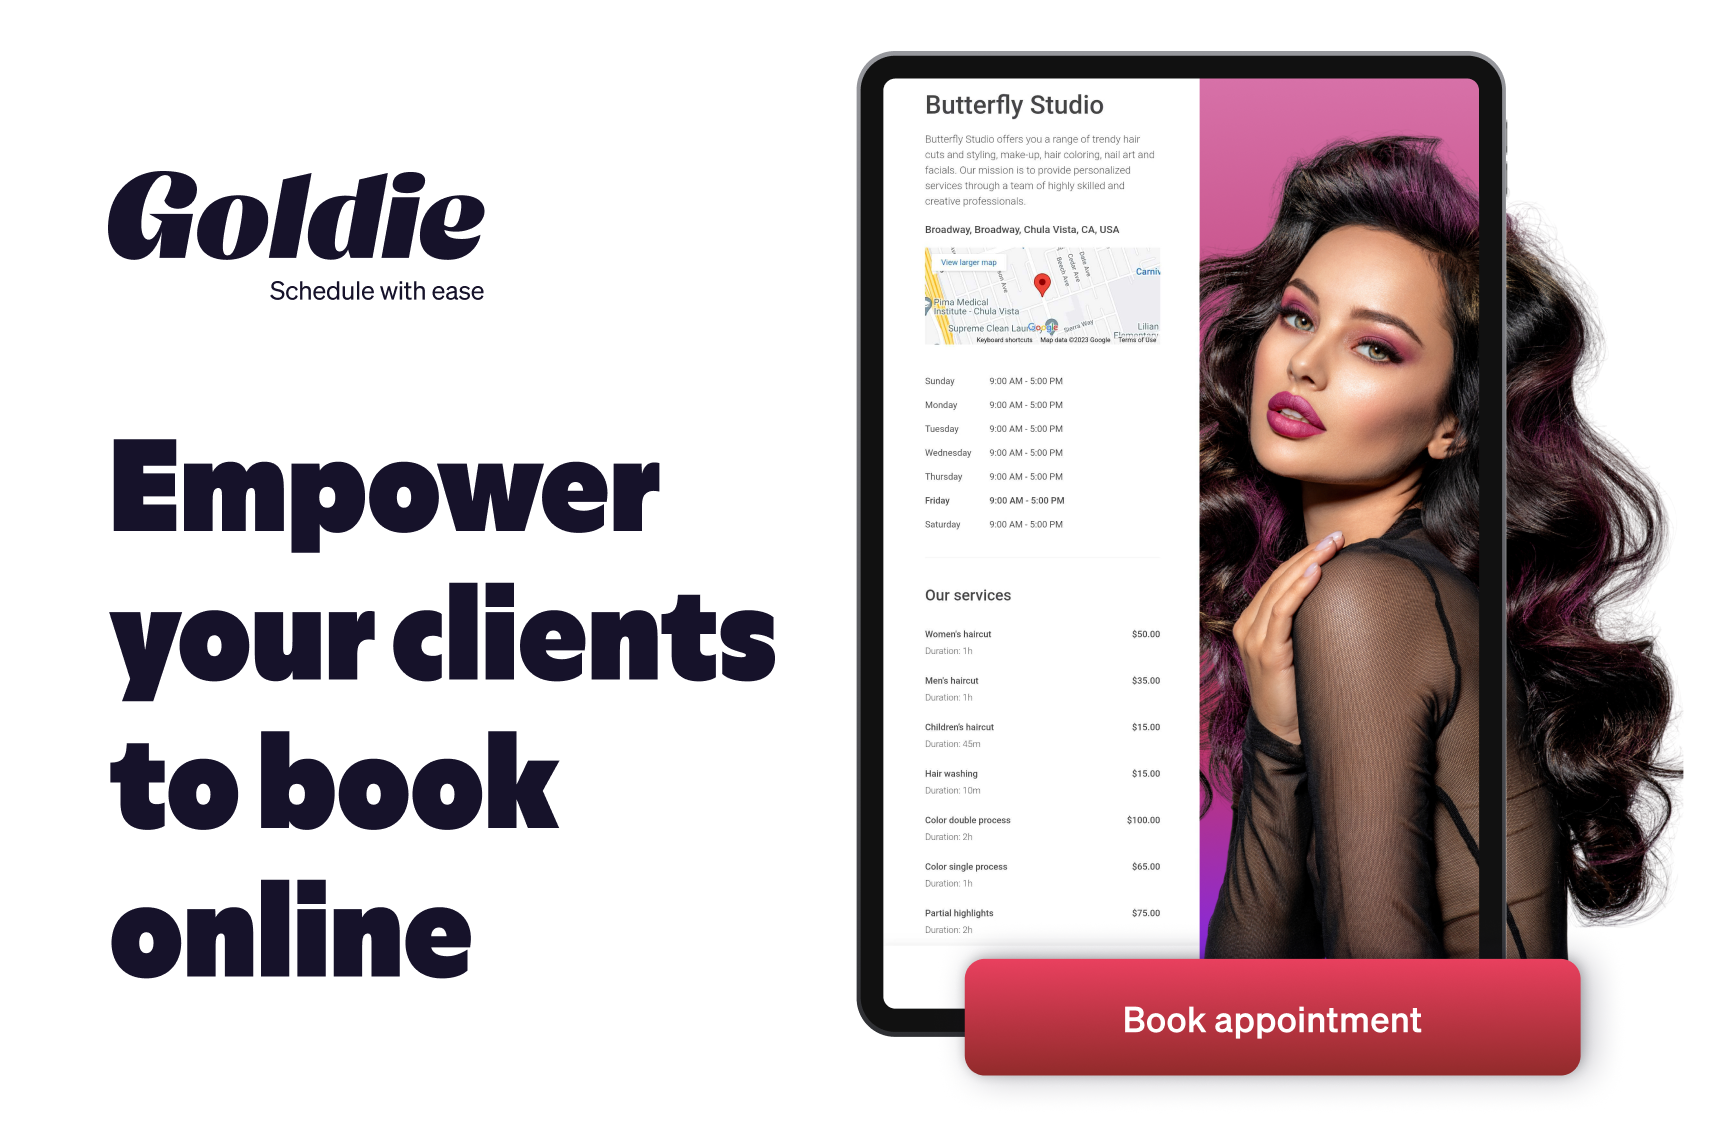 Free online booking website. Easily build and customize your online booking page. Make it easy for clients to book online and get more appointments. Automatically collect deposits from clients when your clients book an appointment.